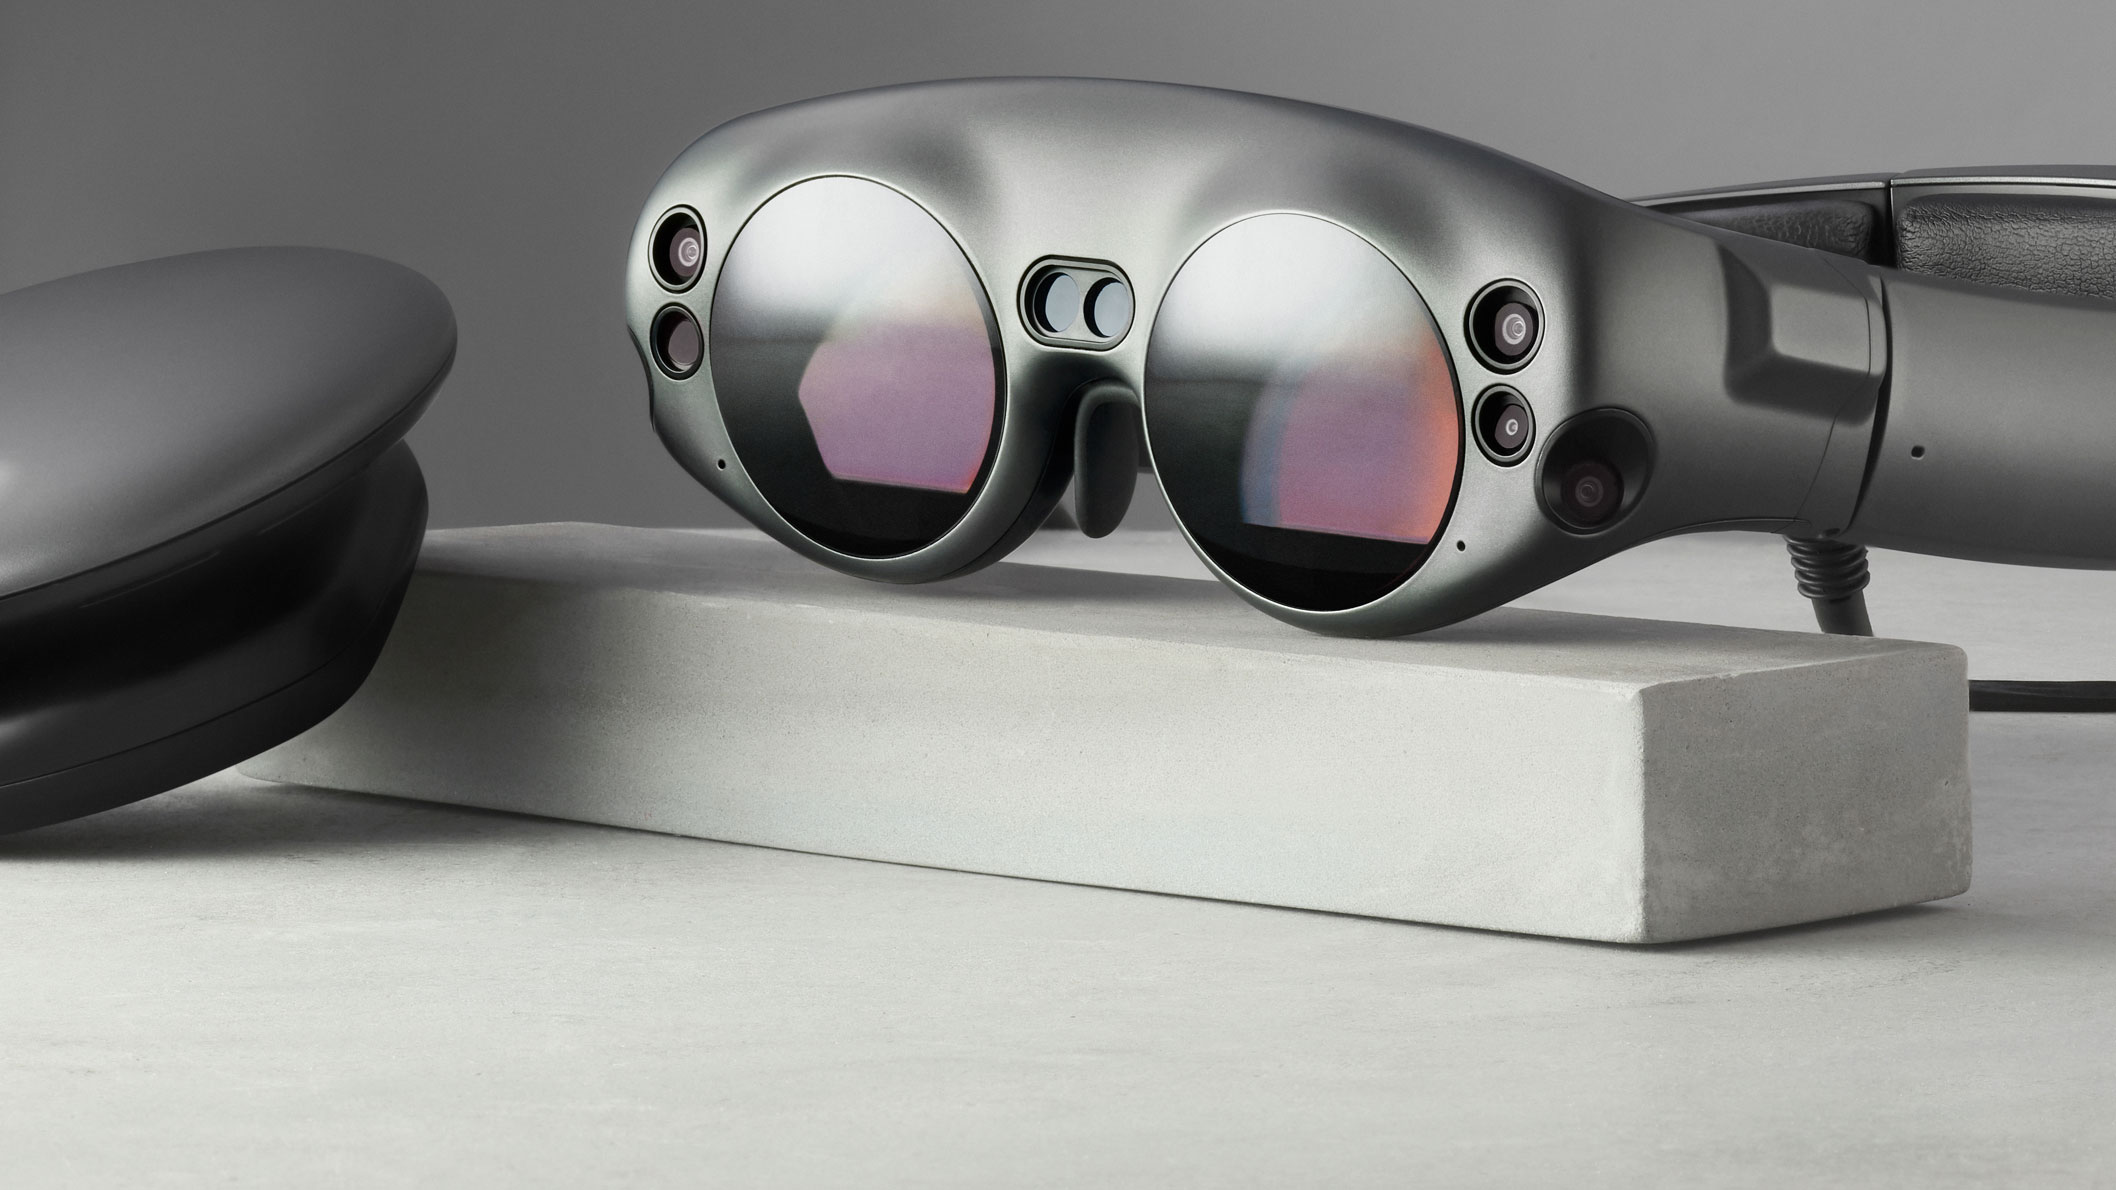 Magic Leap ships test devices to developers under stringent security requirements